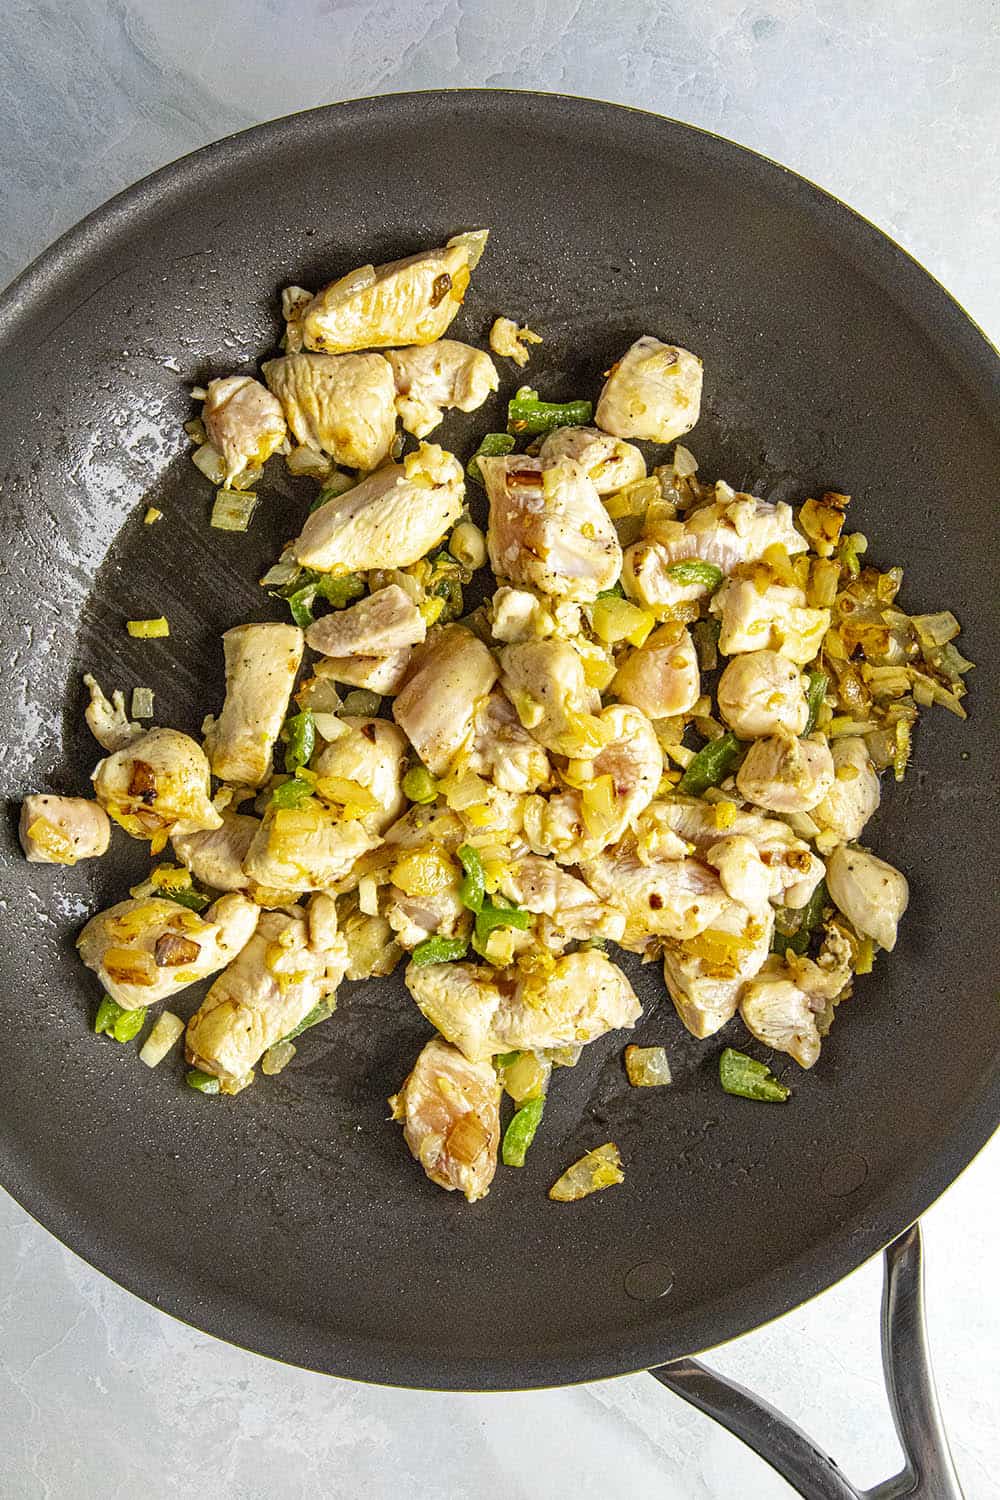 Cooking down the chicken and vegetables in a hot pan